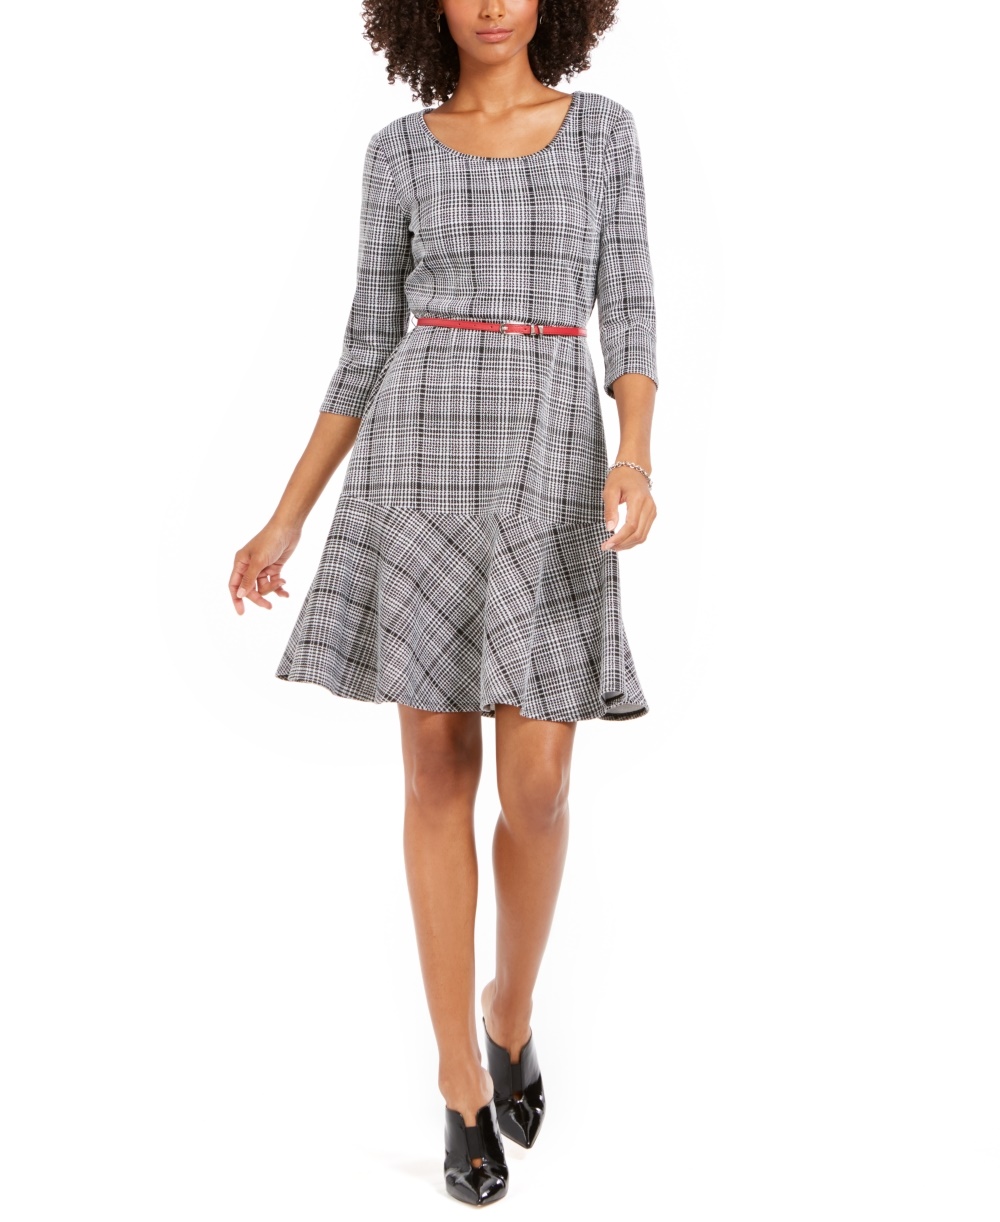 NY Collection Women's Plaid Fit & Flare Dress Black Size Petite Large